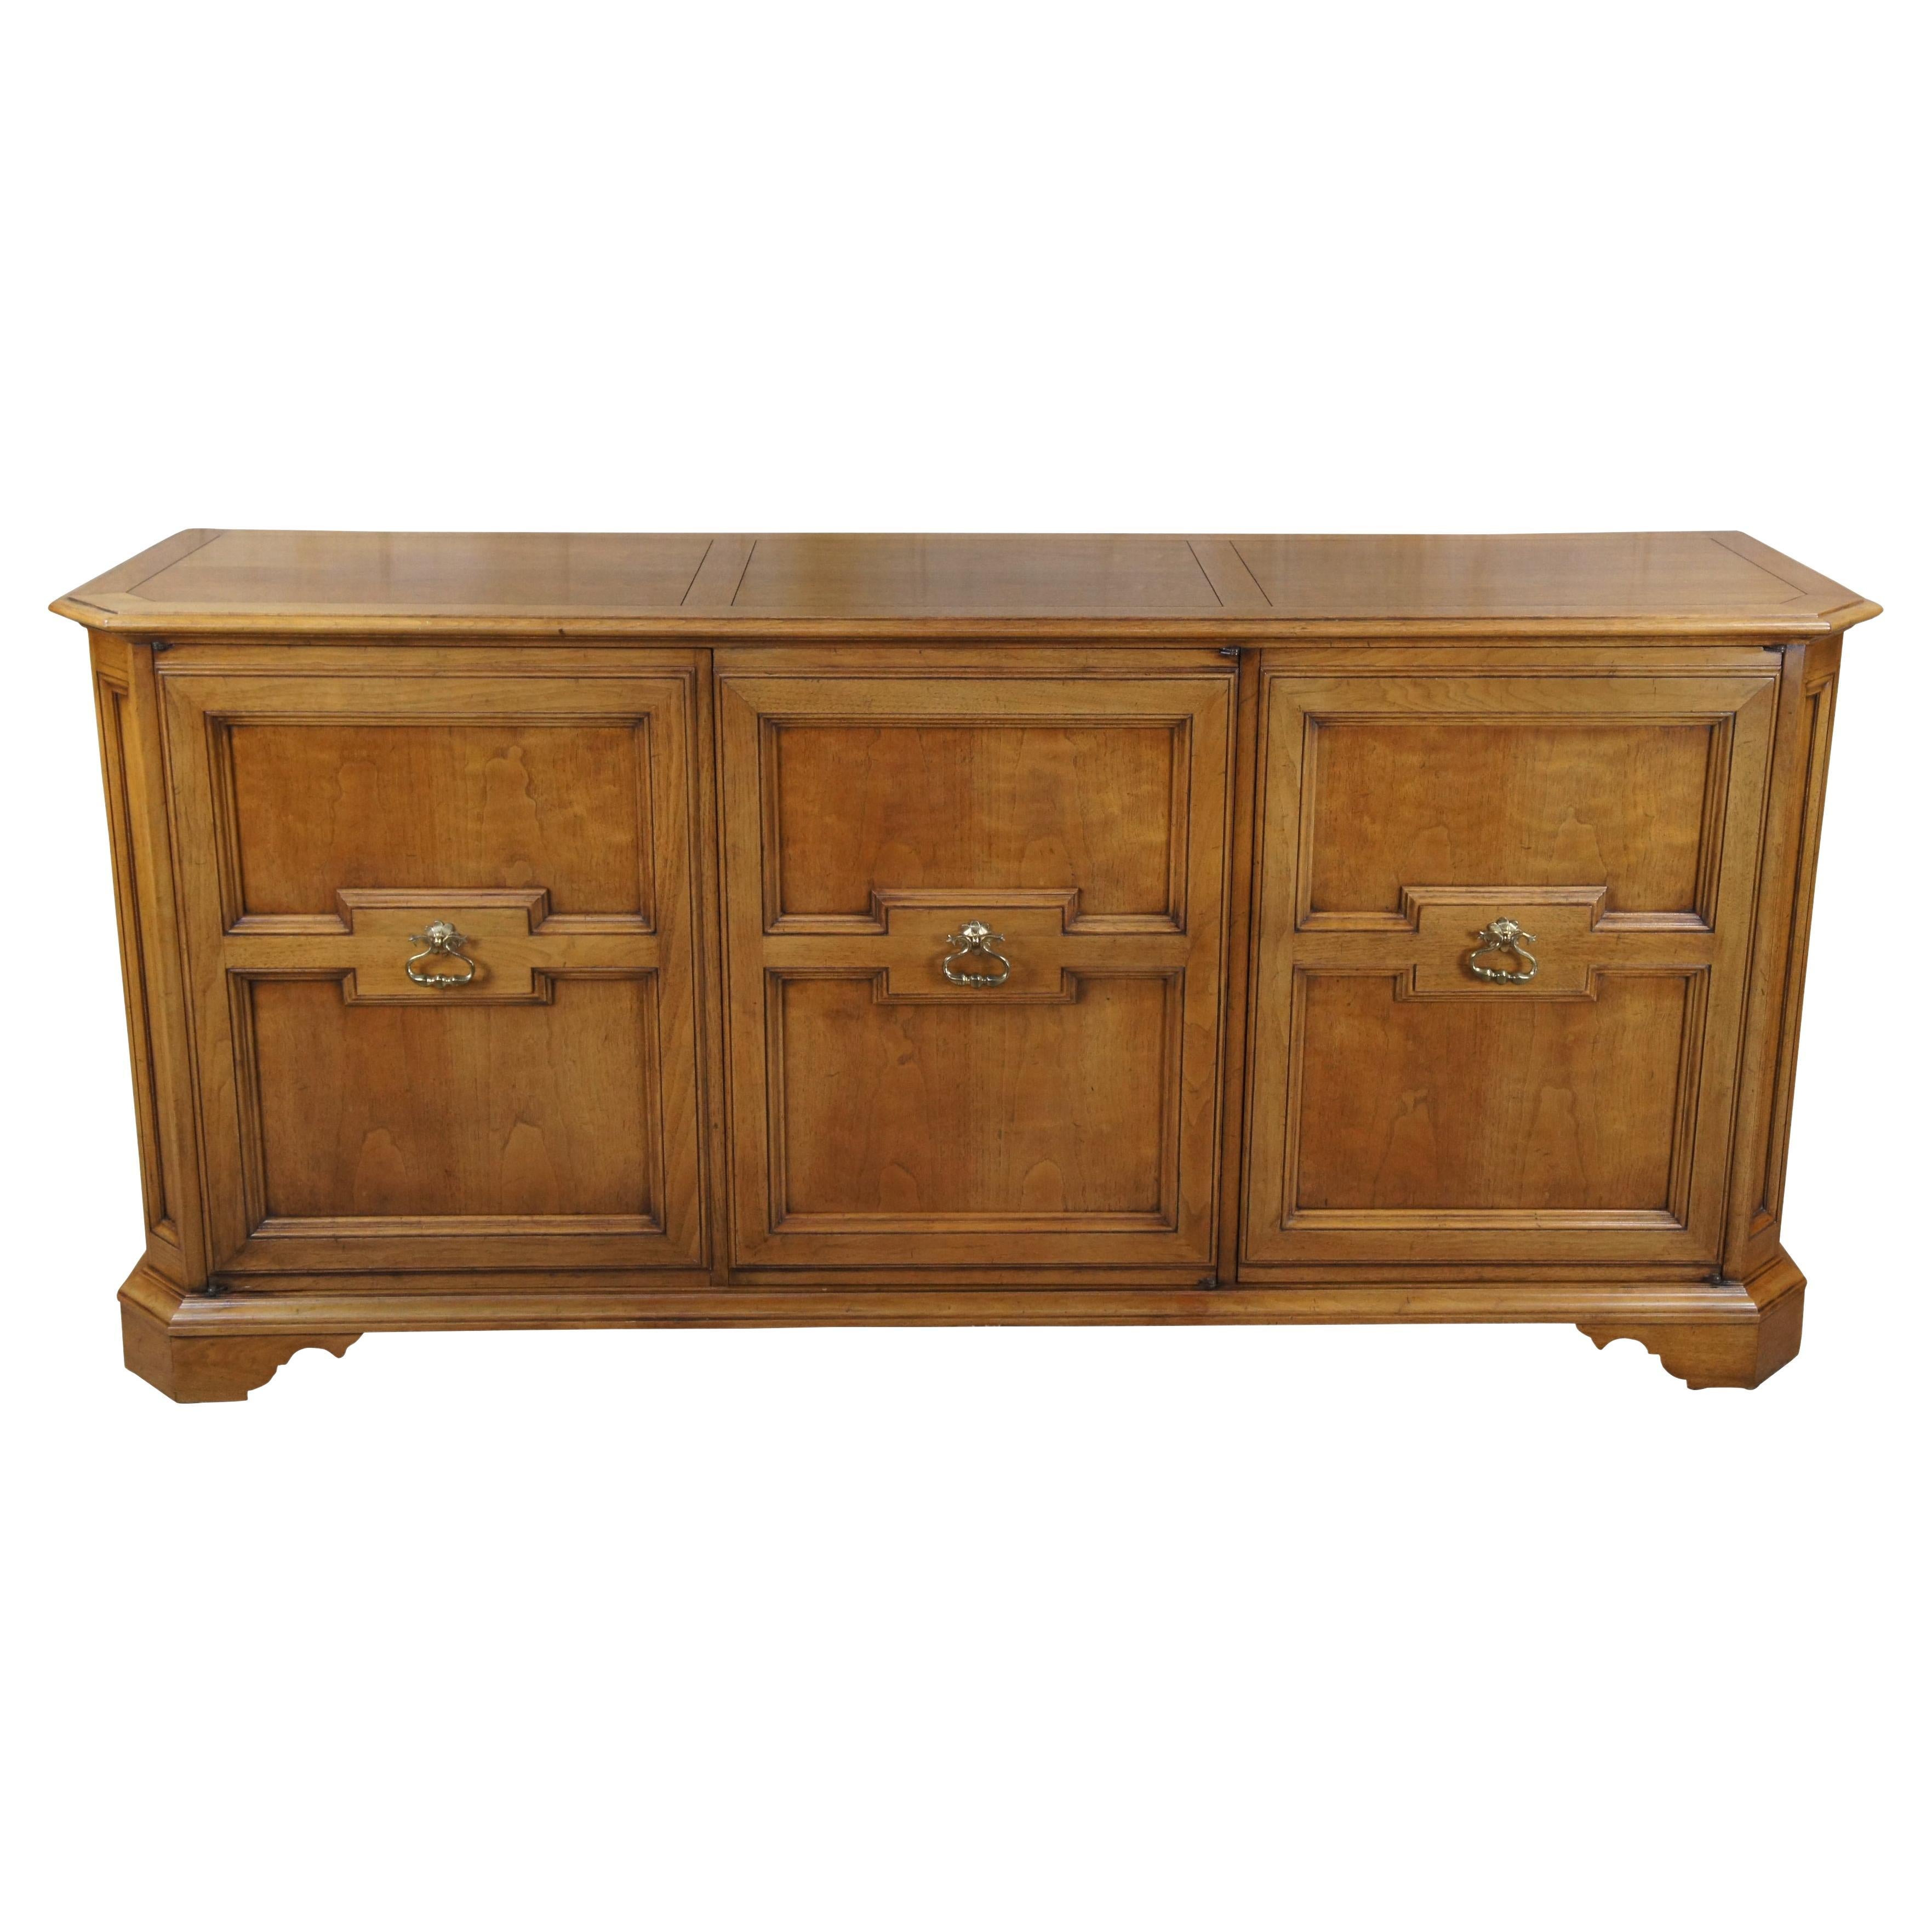 Baker Milling Road Italian Neoclassical Tuscan Walnut Buffet Sideboard Credenza For Sale